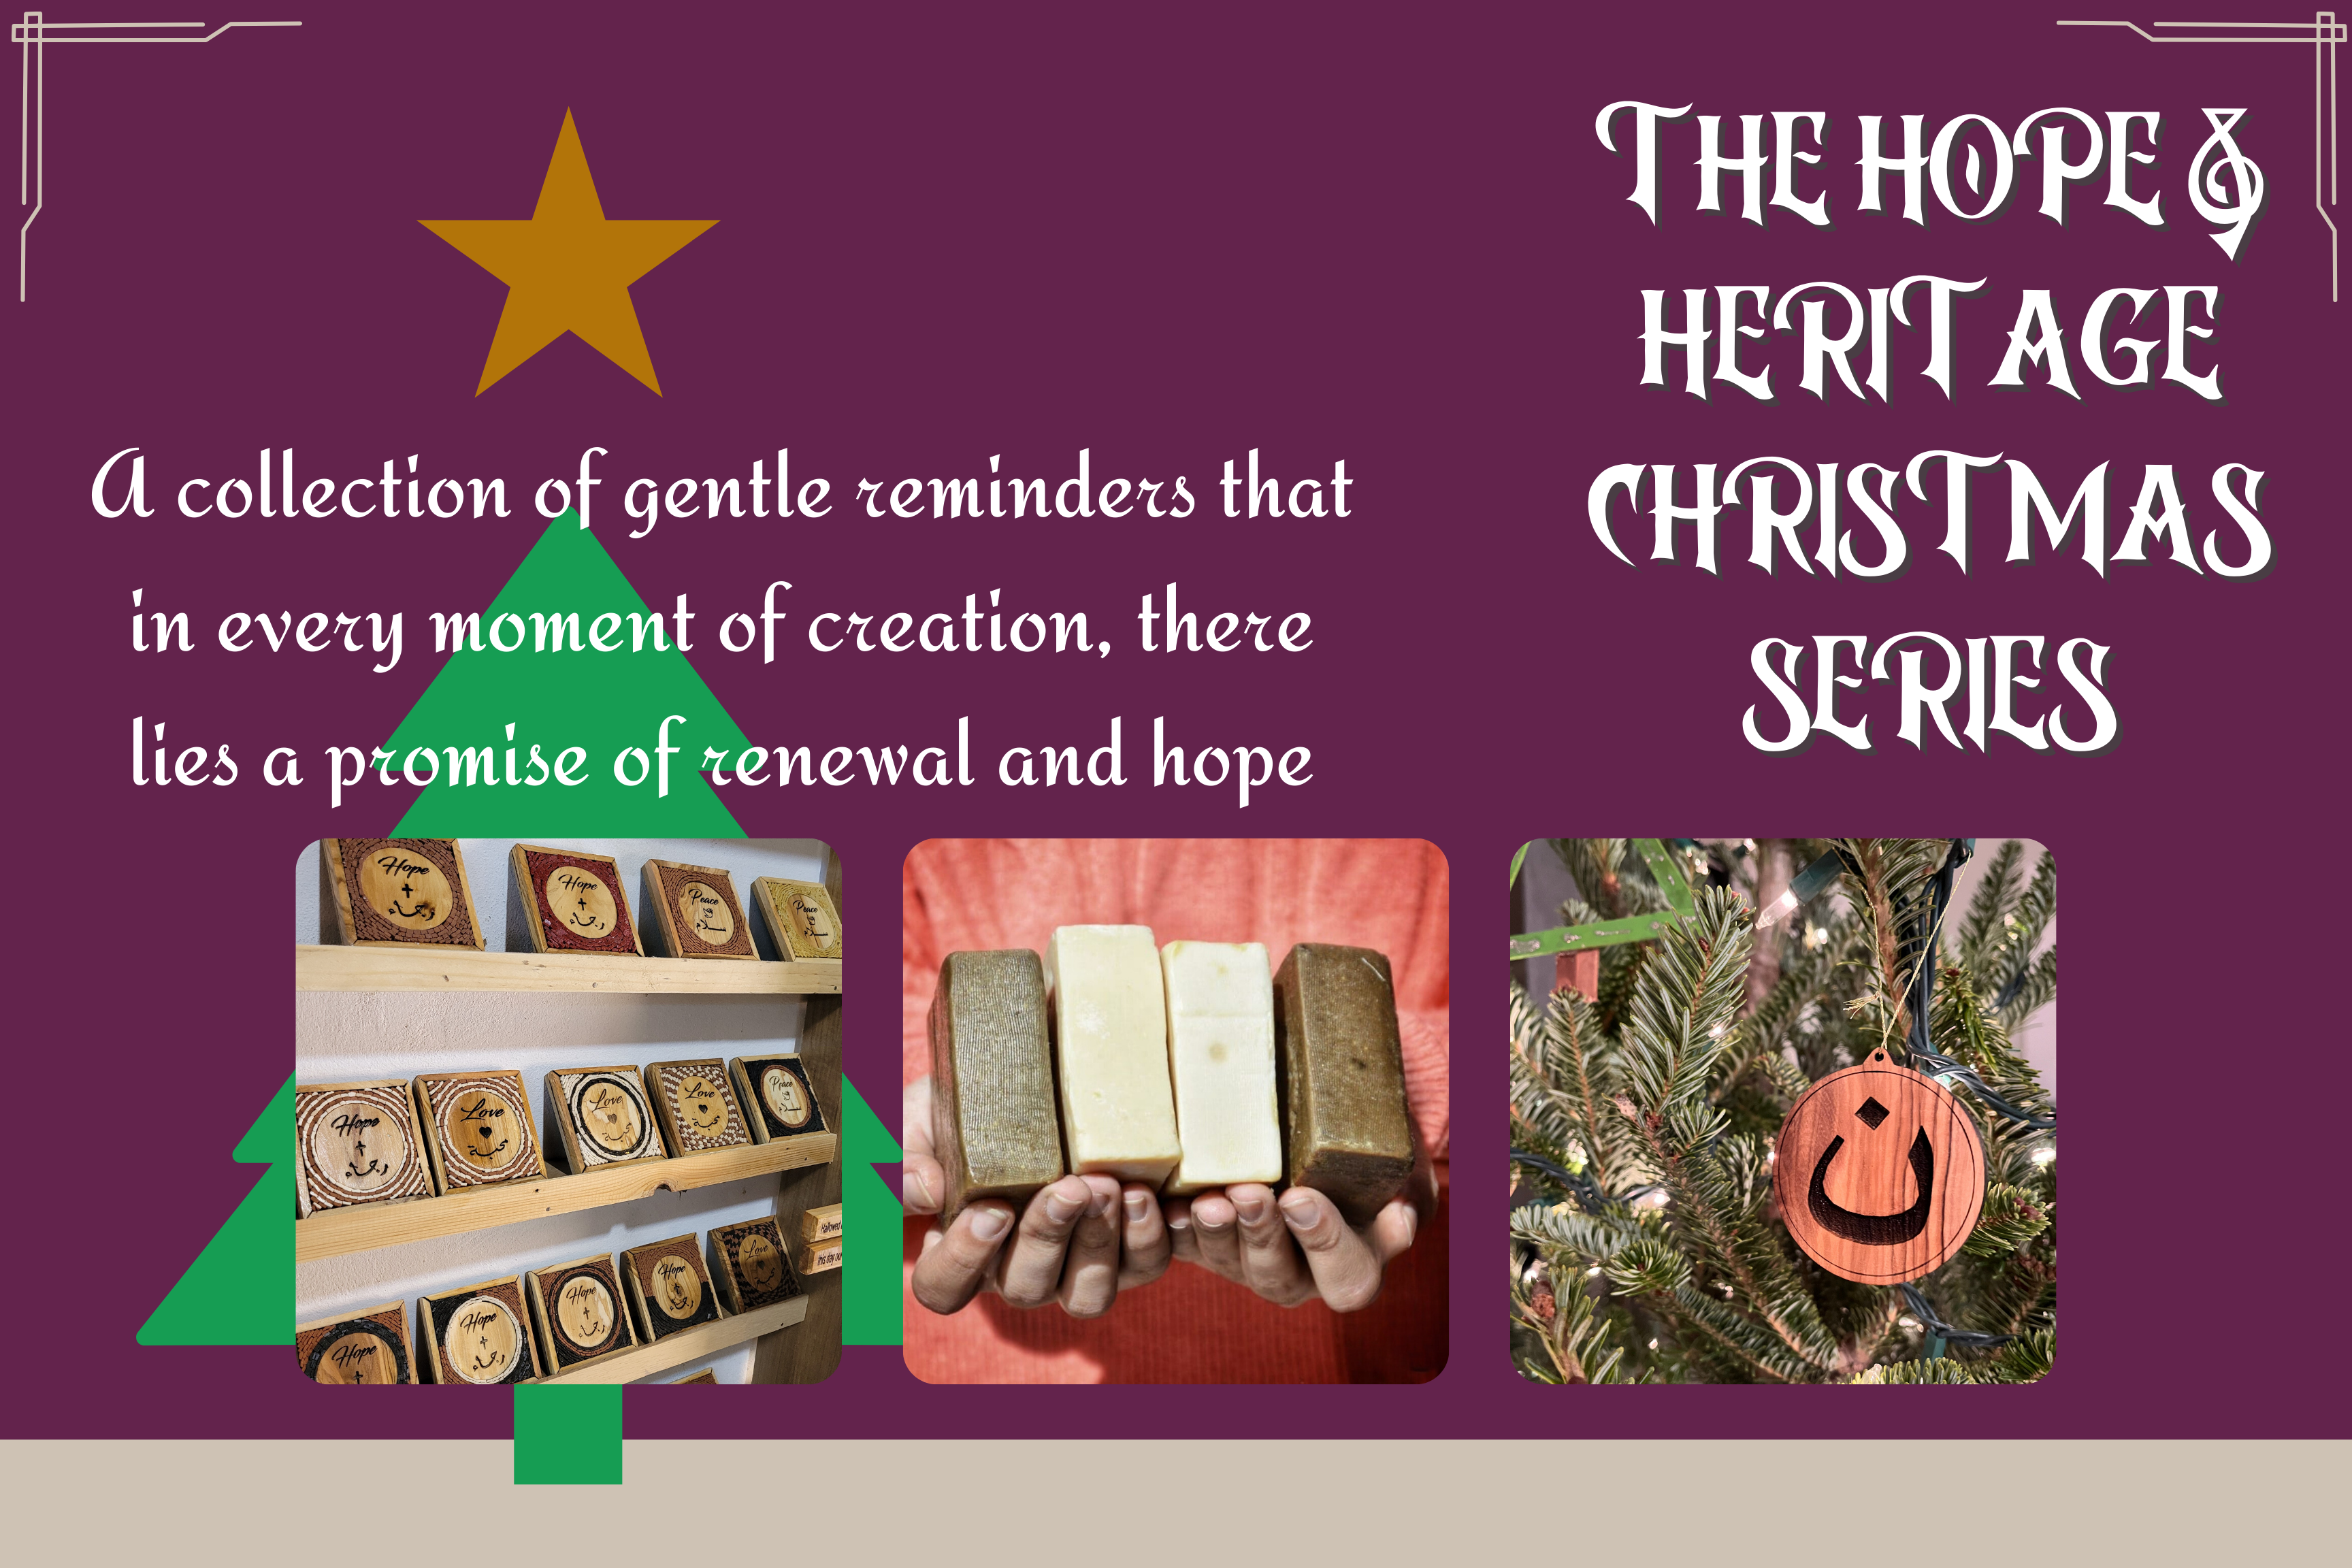 The Hope and Heritage Christmas Series: A collection of gentle reminders that in every moment of creation, there lies a promise of renewal and hope